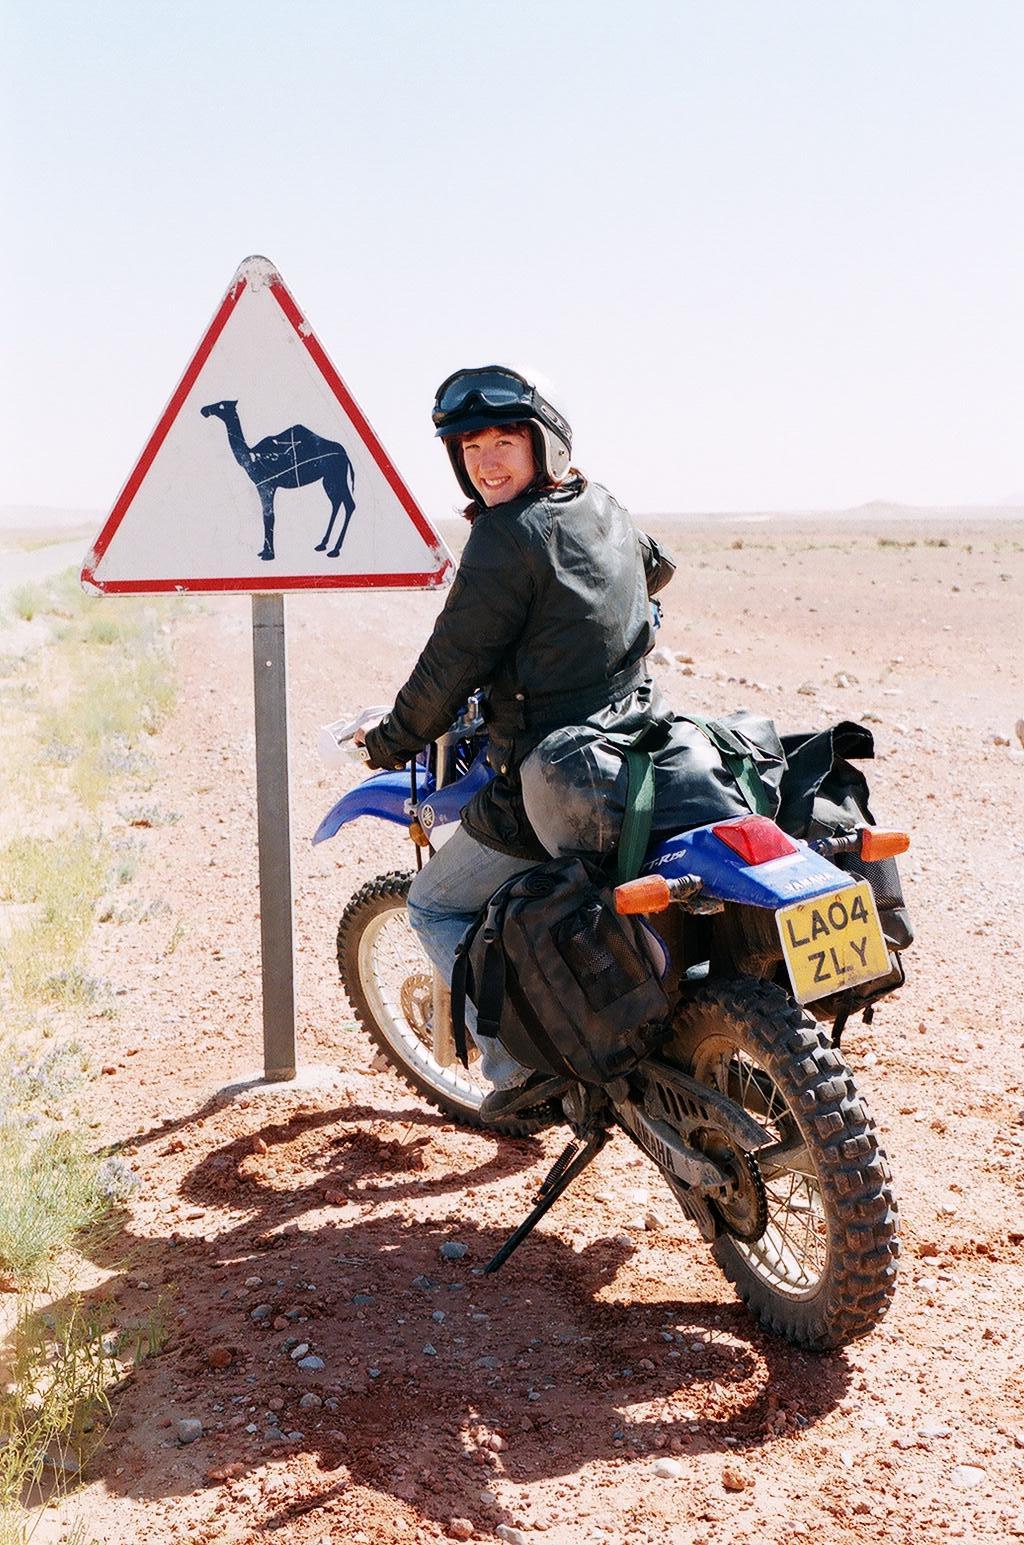 Women Who Ride: Lois Pryce in Morocco next to a road sign depicting a camel